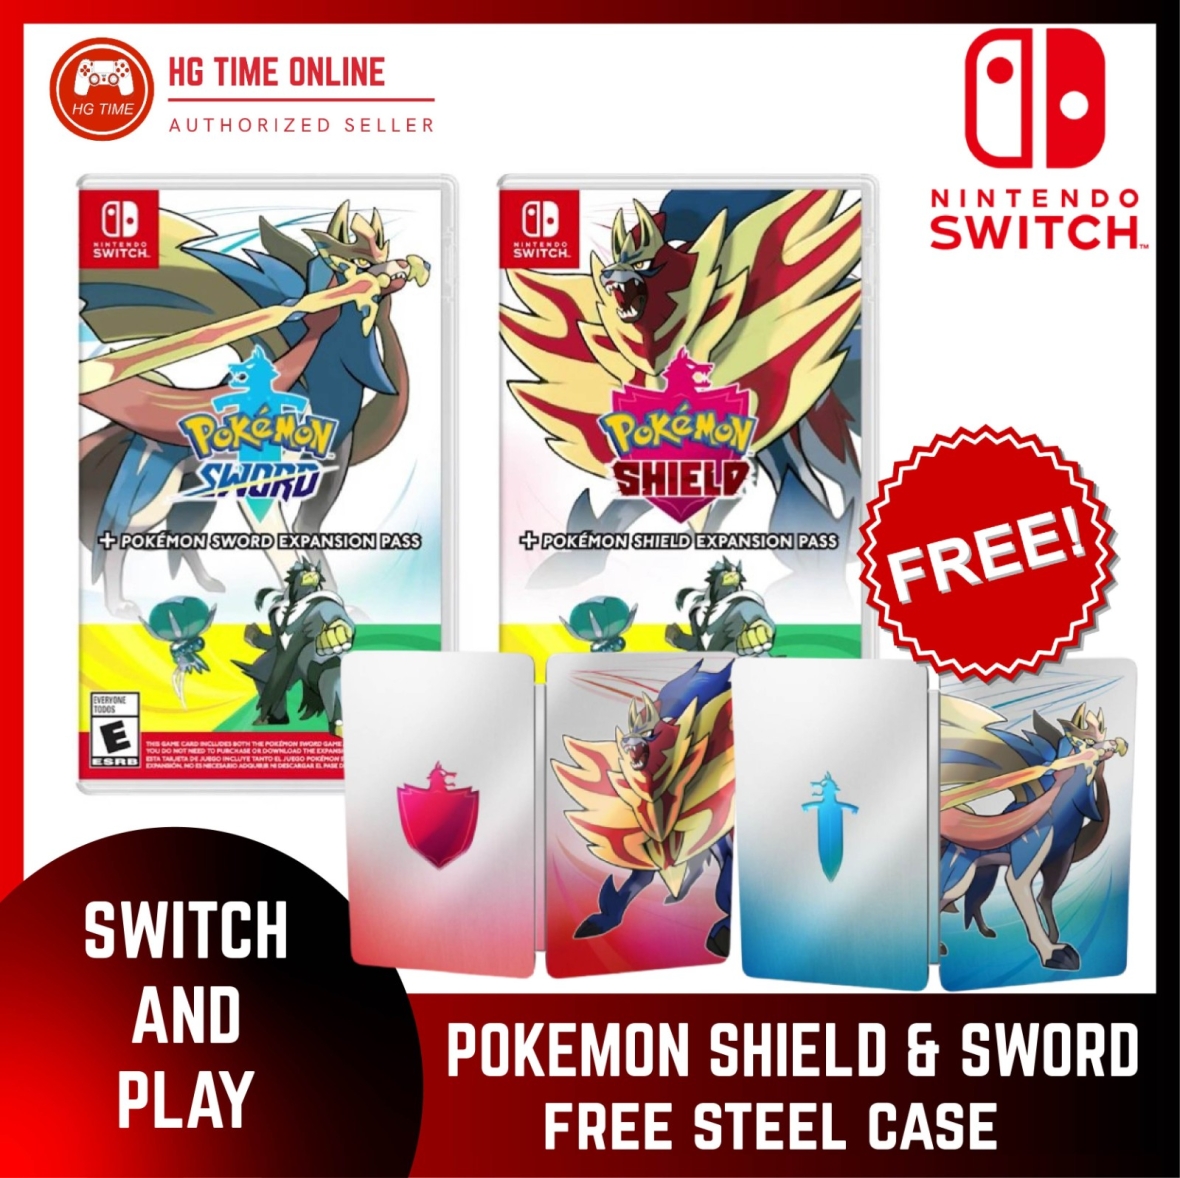 Nsw Nintendo Switch Pokemon Shield Sword Expansion Pass With Free Steel Case Switch Game Supplier Suppliers Supply Supplies Hg Time Enterprise